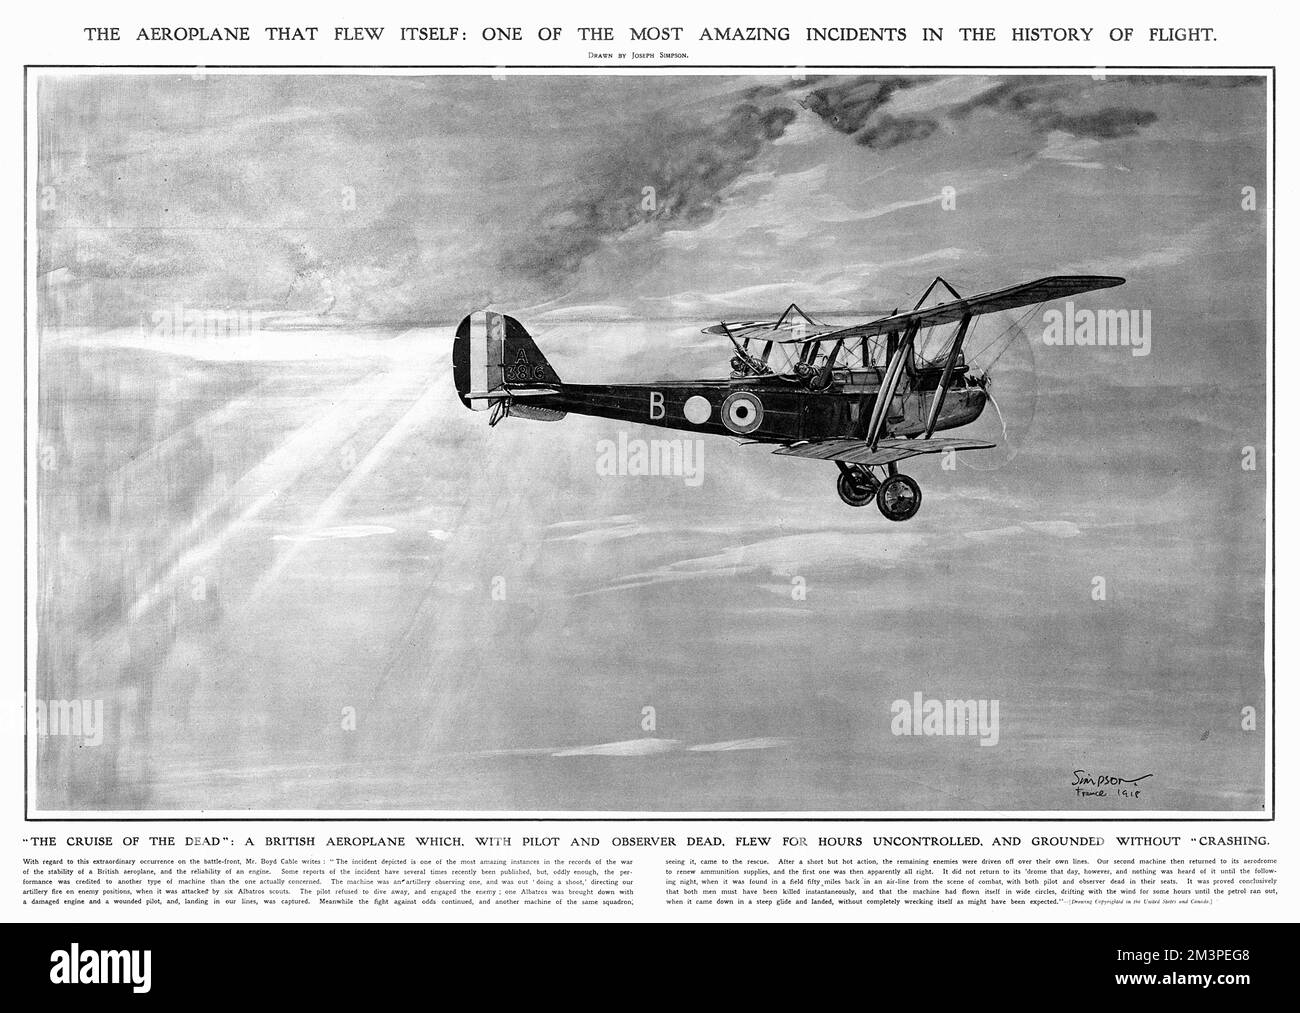 A British biplane flies on, though the pilot and observer are both dead. The aeroplane was observing artillery when set upon by enemy Albatros scouts. With the aid of another aircraft from the same squadron, the British 'plane was able to drive the enemy planes away back to their lines. Assuming all was well with the first British 'plane, the second returned to its aerodrome. When it failed to return, it was only found the following night, fifty miles from the scene of combat. Both pilot and observer had been killed during the dogfight, and their 'plane had flown itself in broad circles until Stock Photo